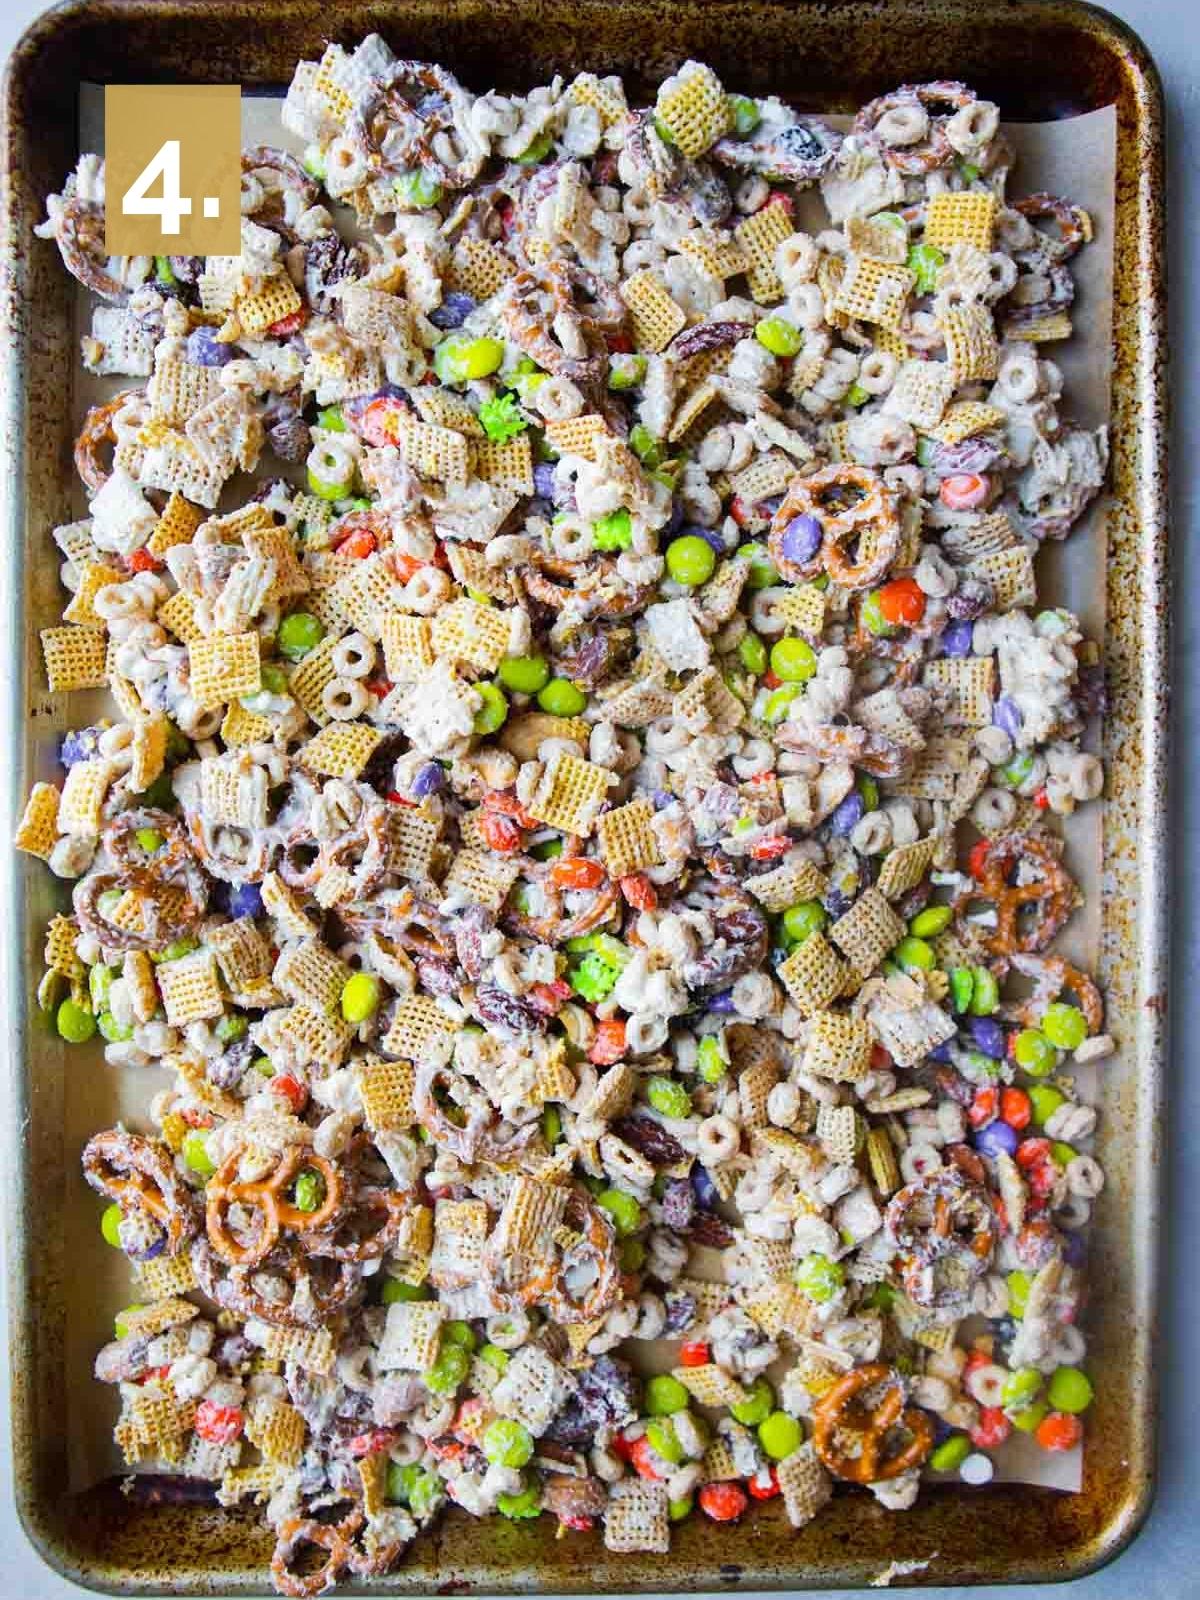 white chocolate Chex mix with Halloween candy drying on a parchment lined baking tray